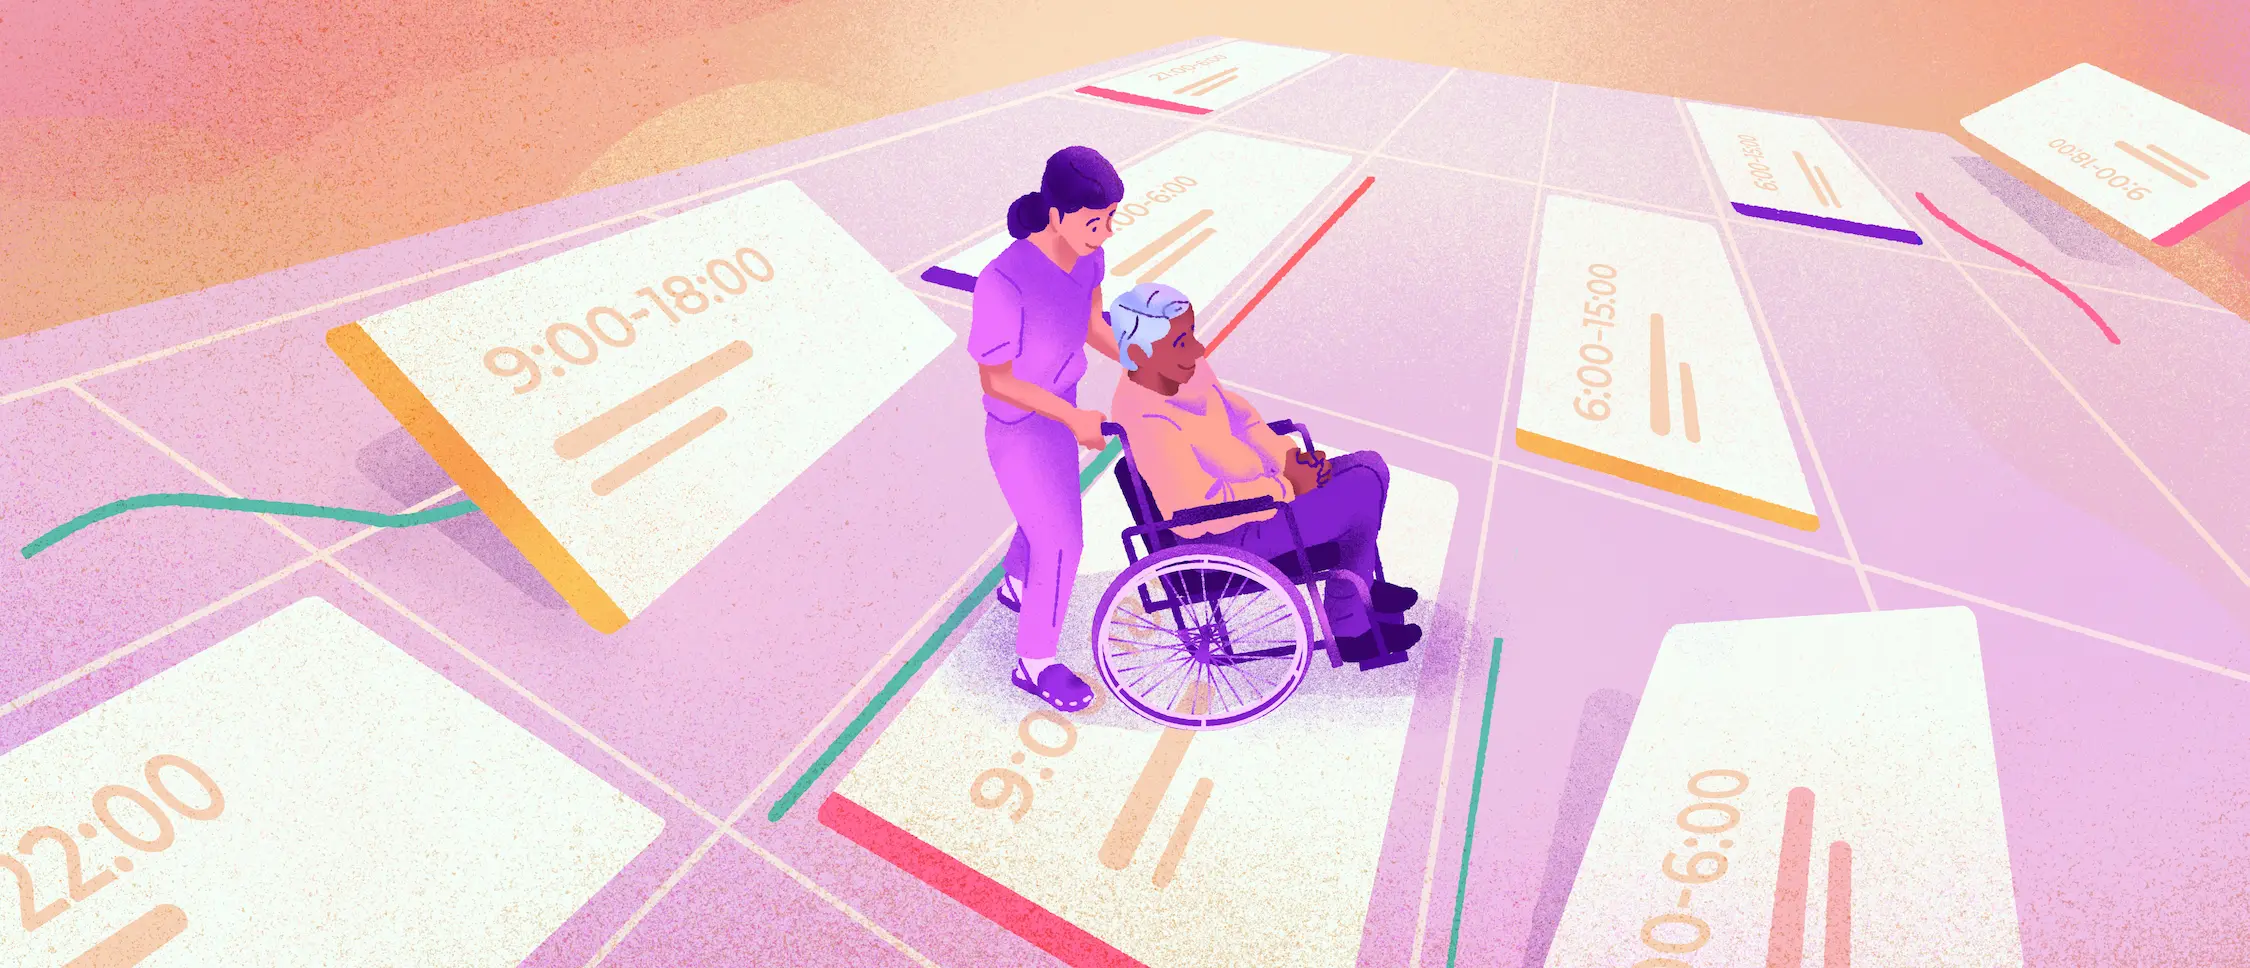 Lady pushing an elderly man in a wheelchair on a floor made of a schedule